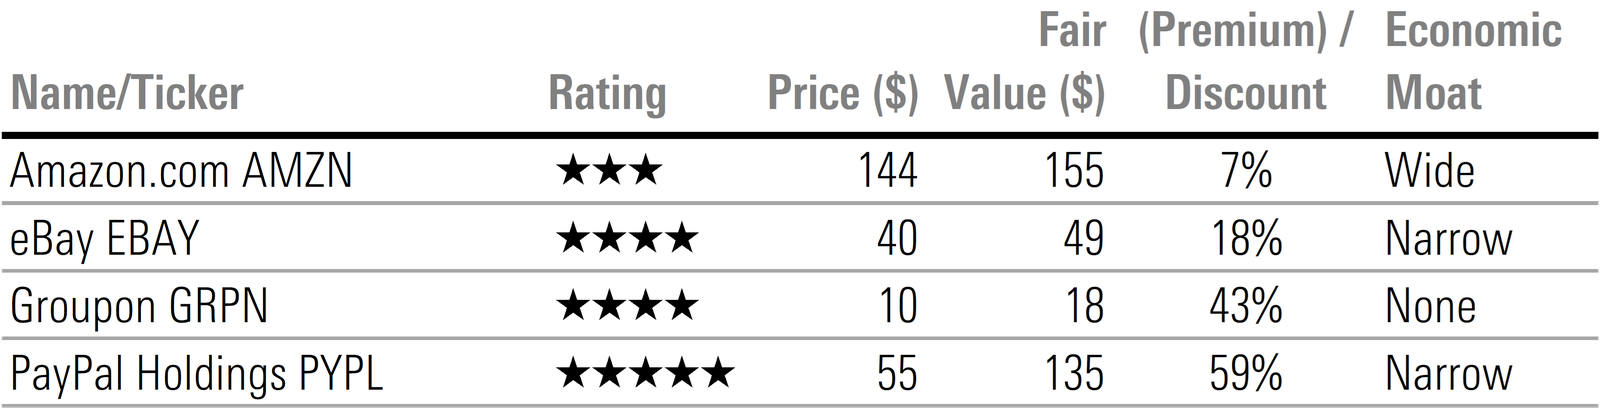 Table displaying star rating, price, fair value, premium or discount, and economic moat rating for stocks under Morningstar coverage in the e-commerce sector.